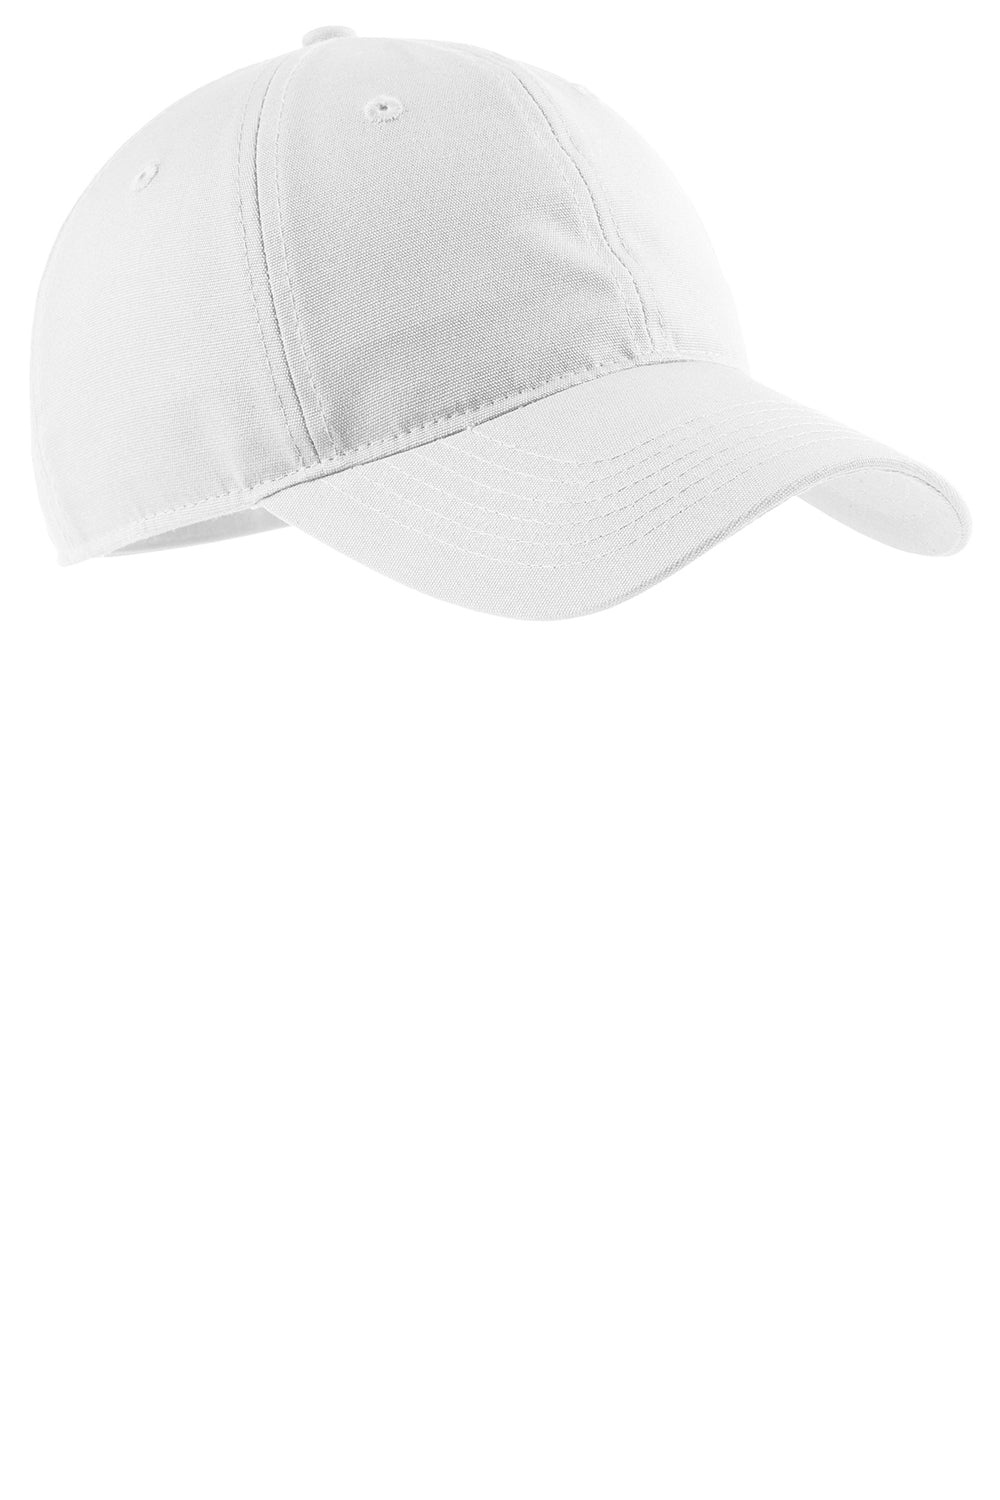 Port Authority CP96 Mens Adjustable Hat White Front